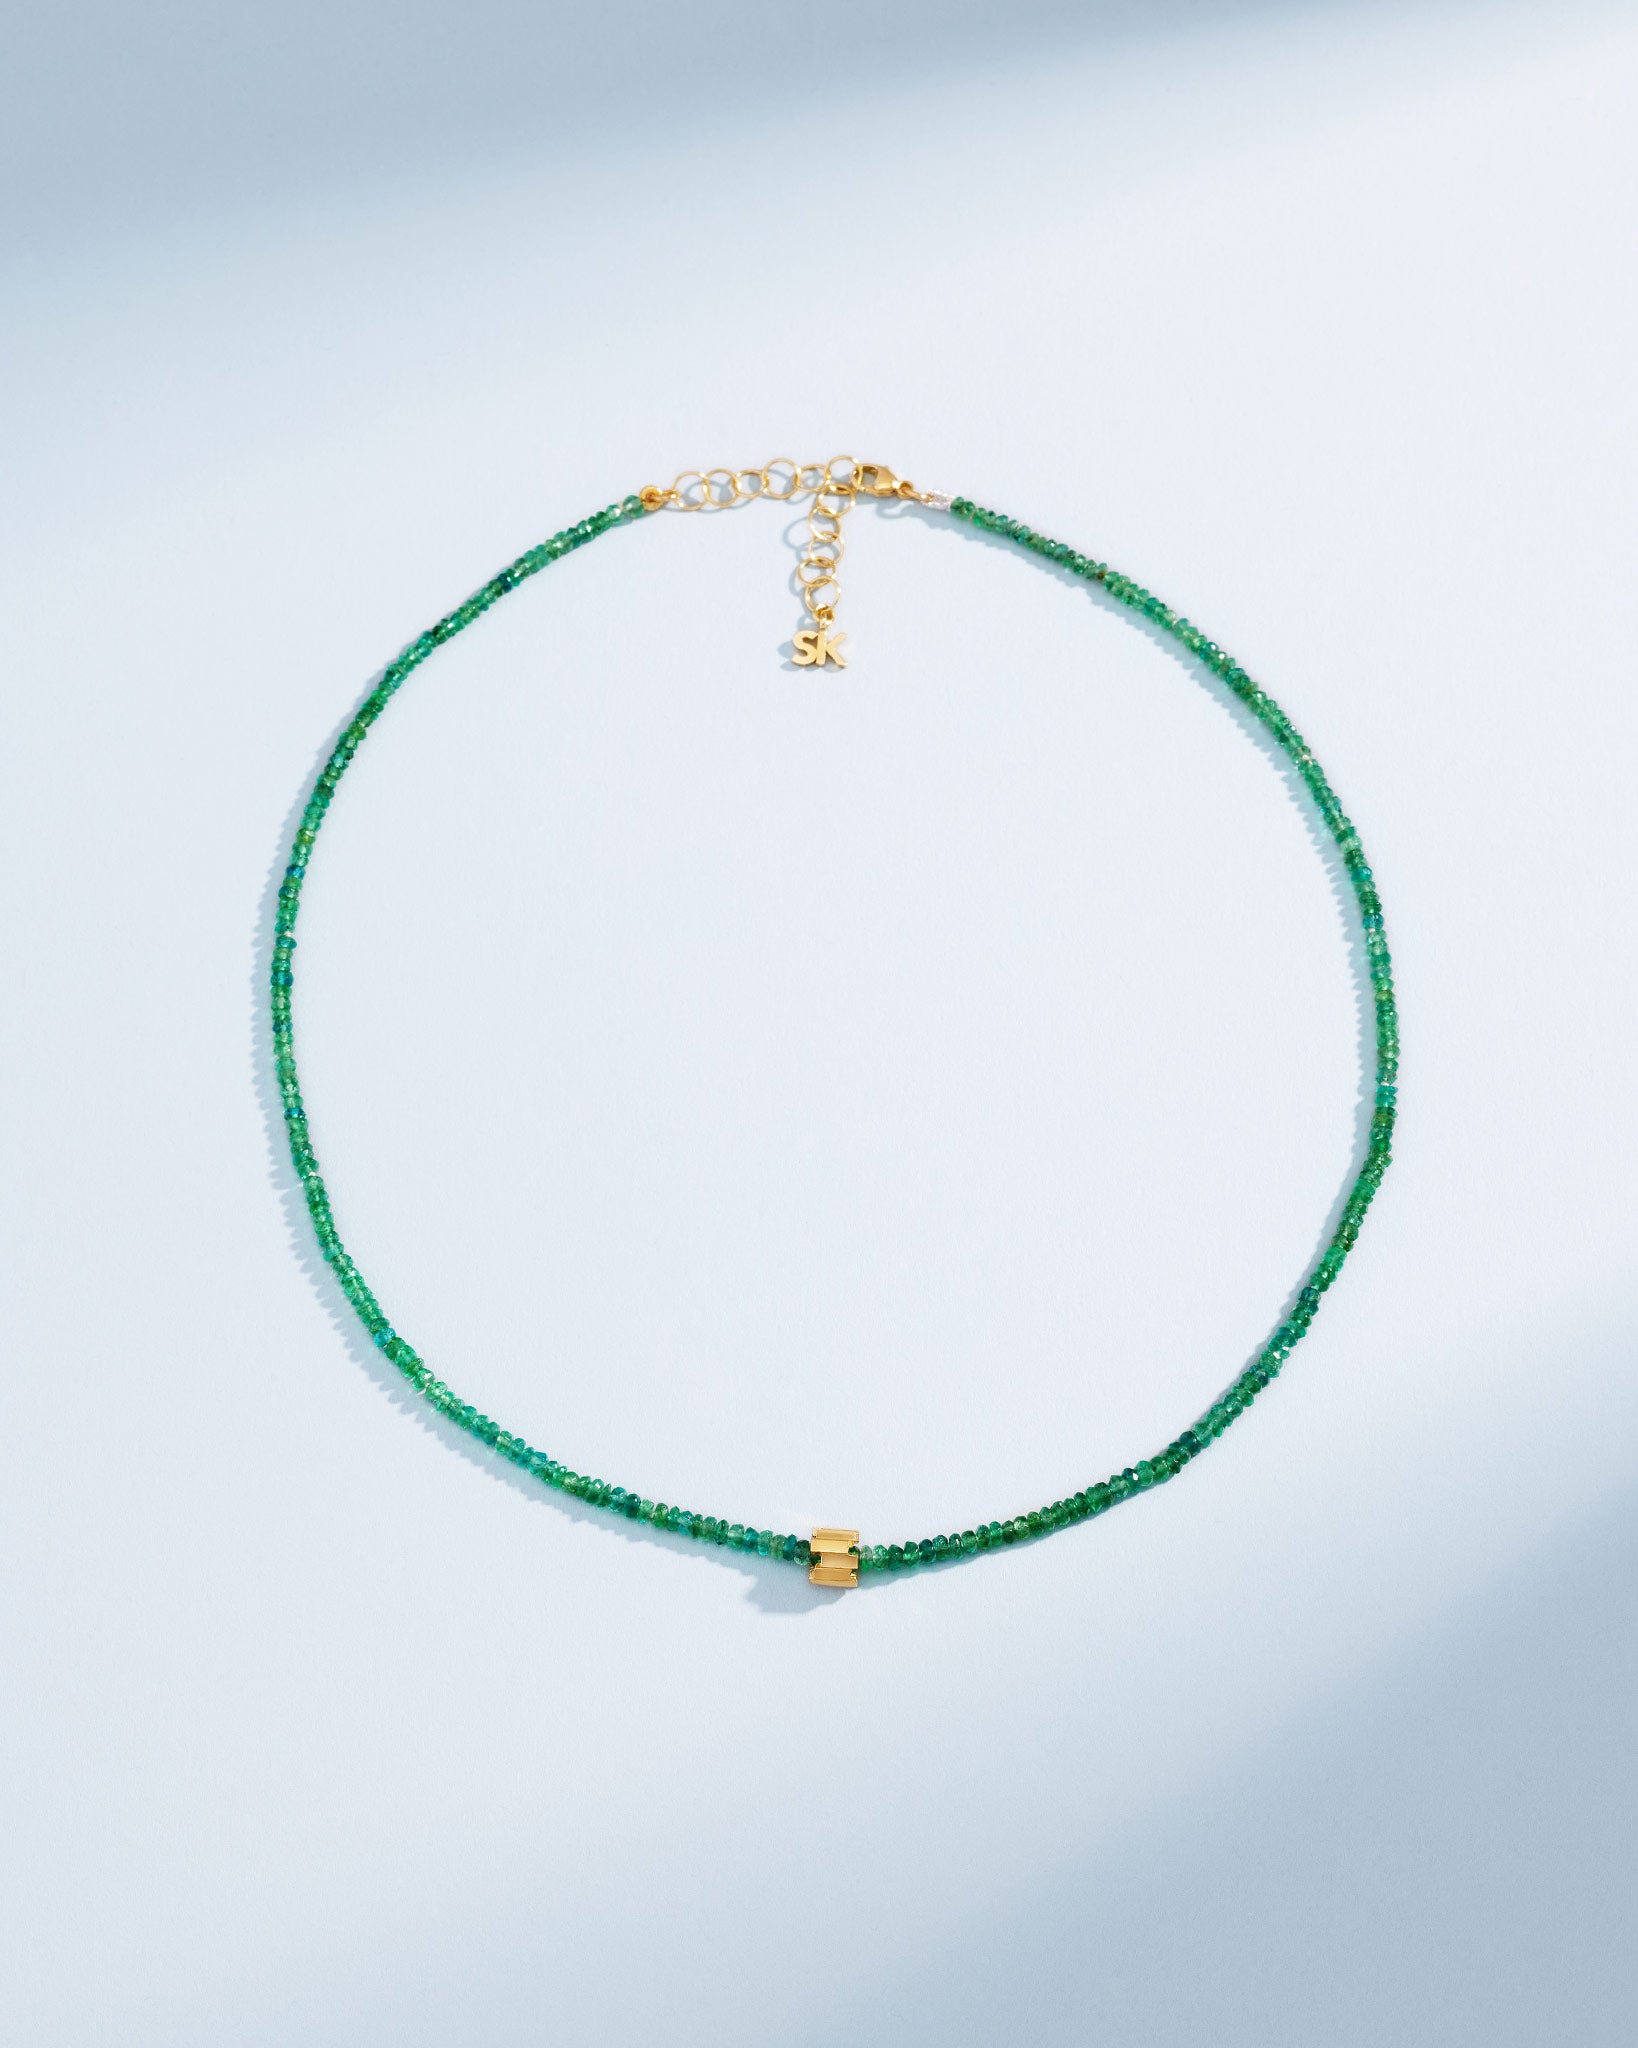 Suzanne Kalan Infinite Beaded Emerald & Mini Golden Rondelle Necklace in 18k yellow gold